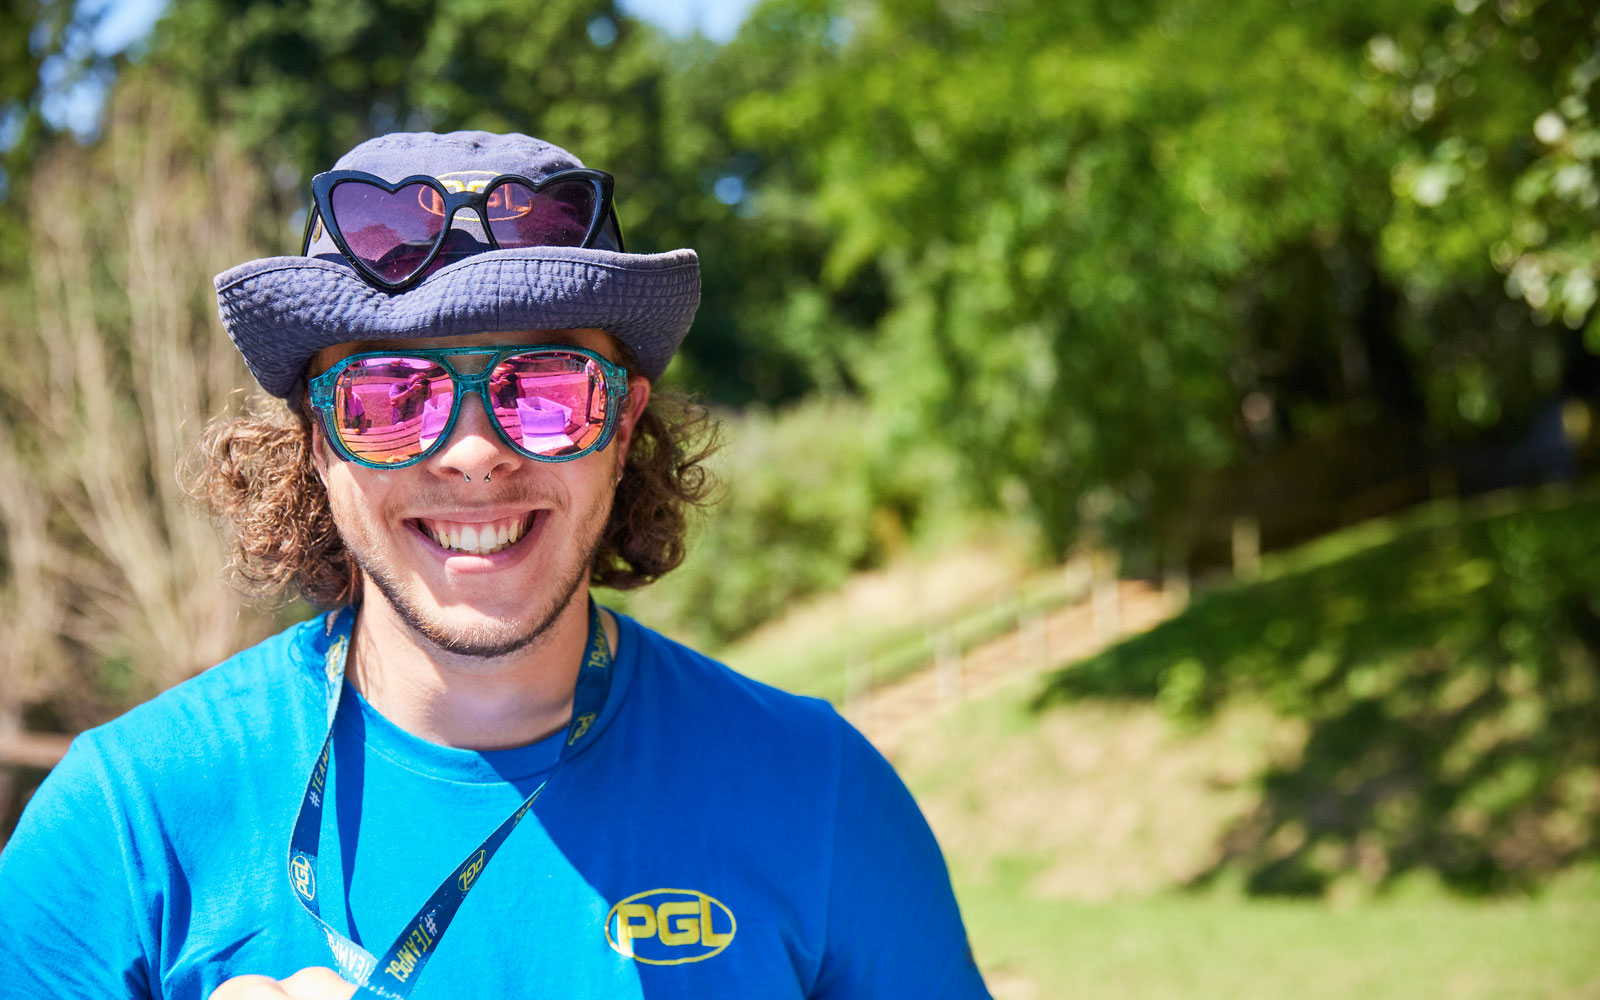 A smiling PGL employee in sunglasses